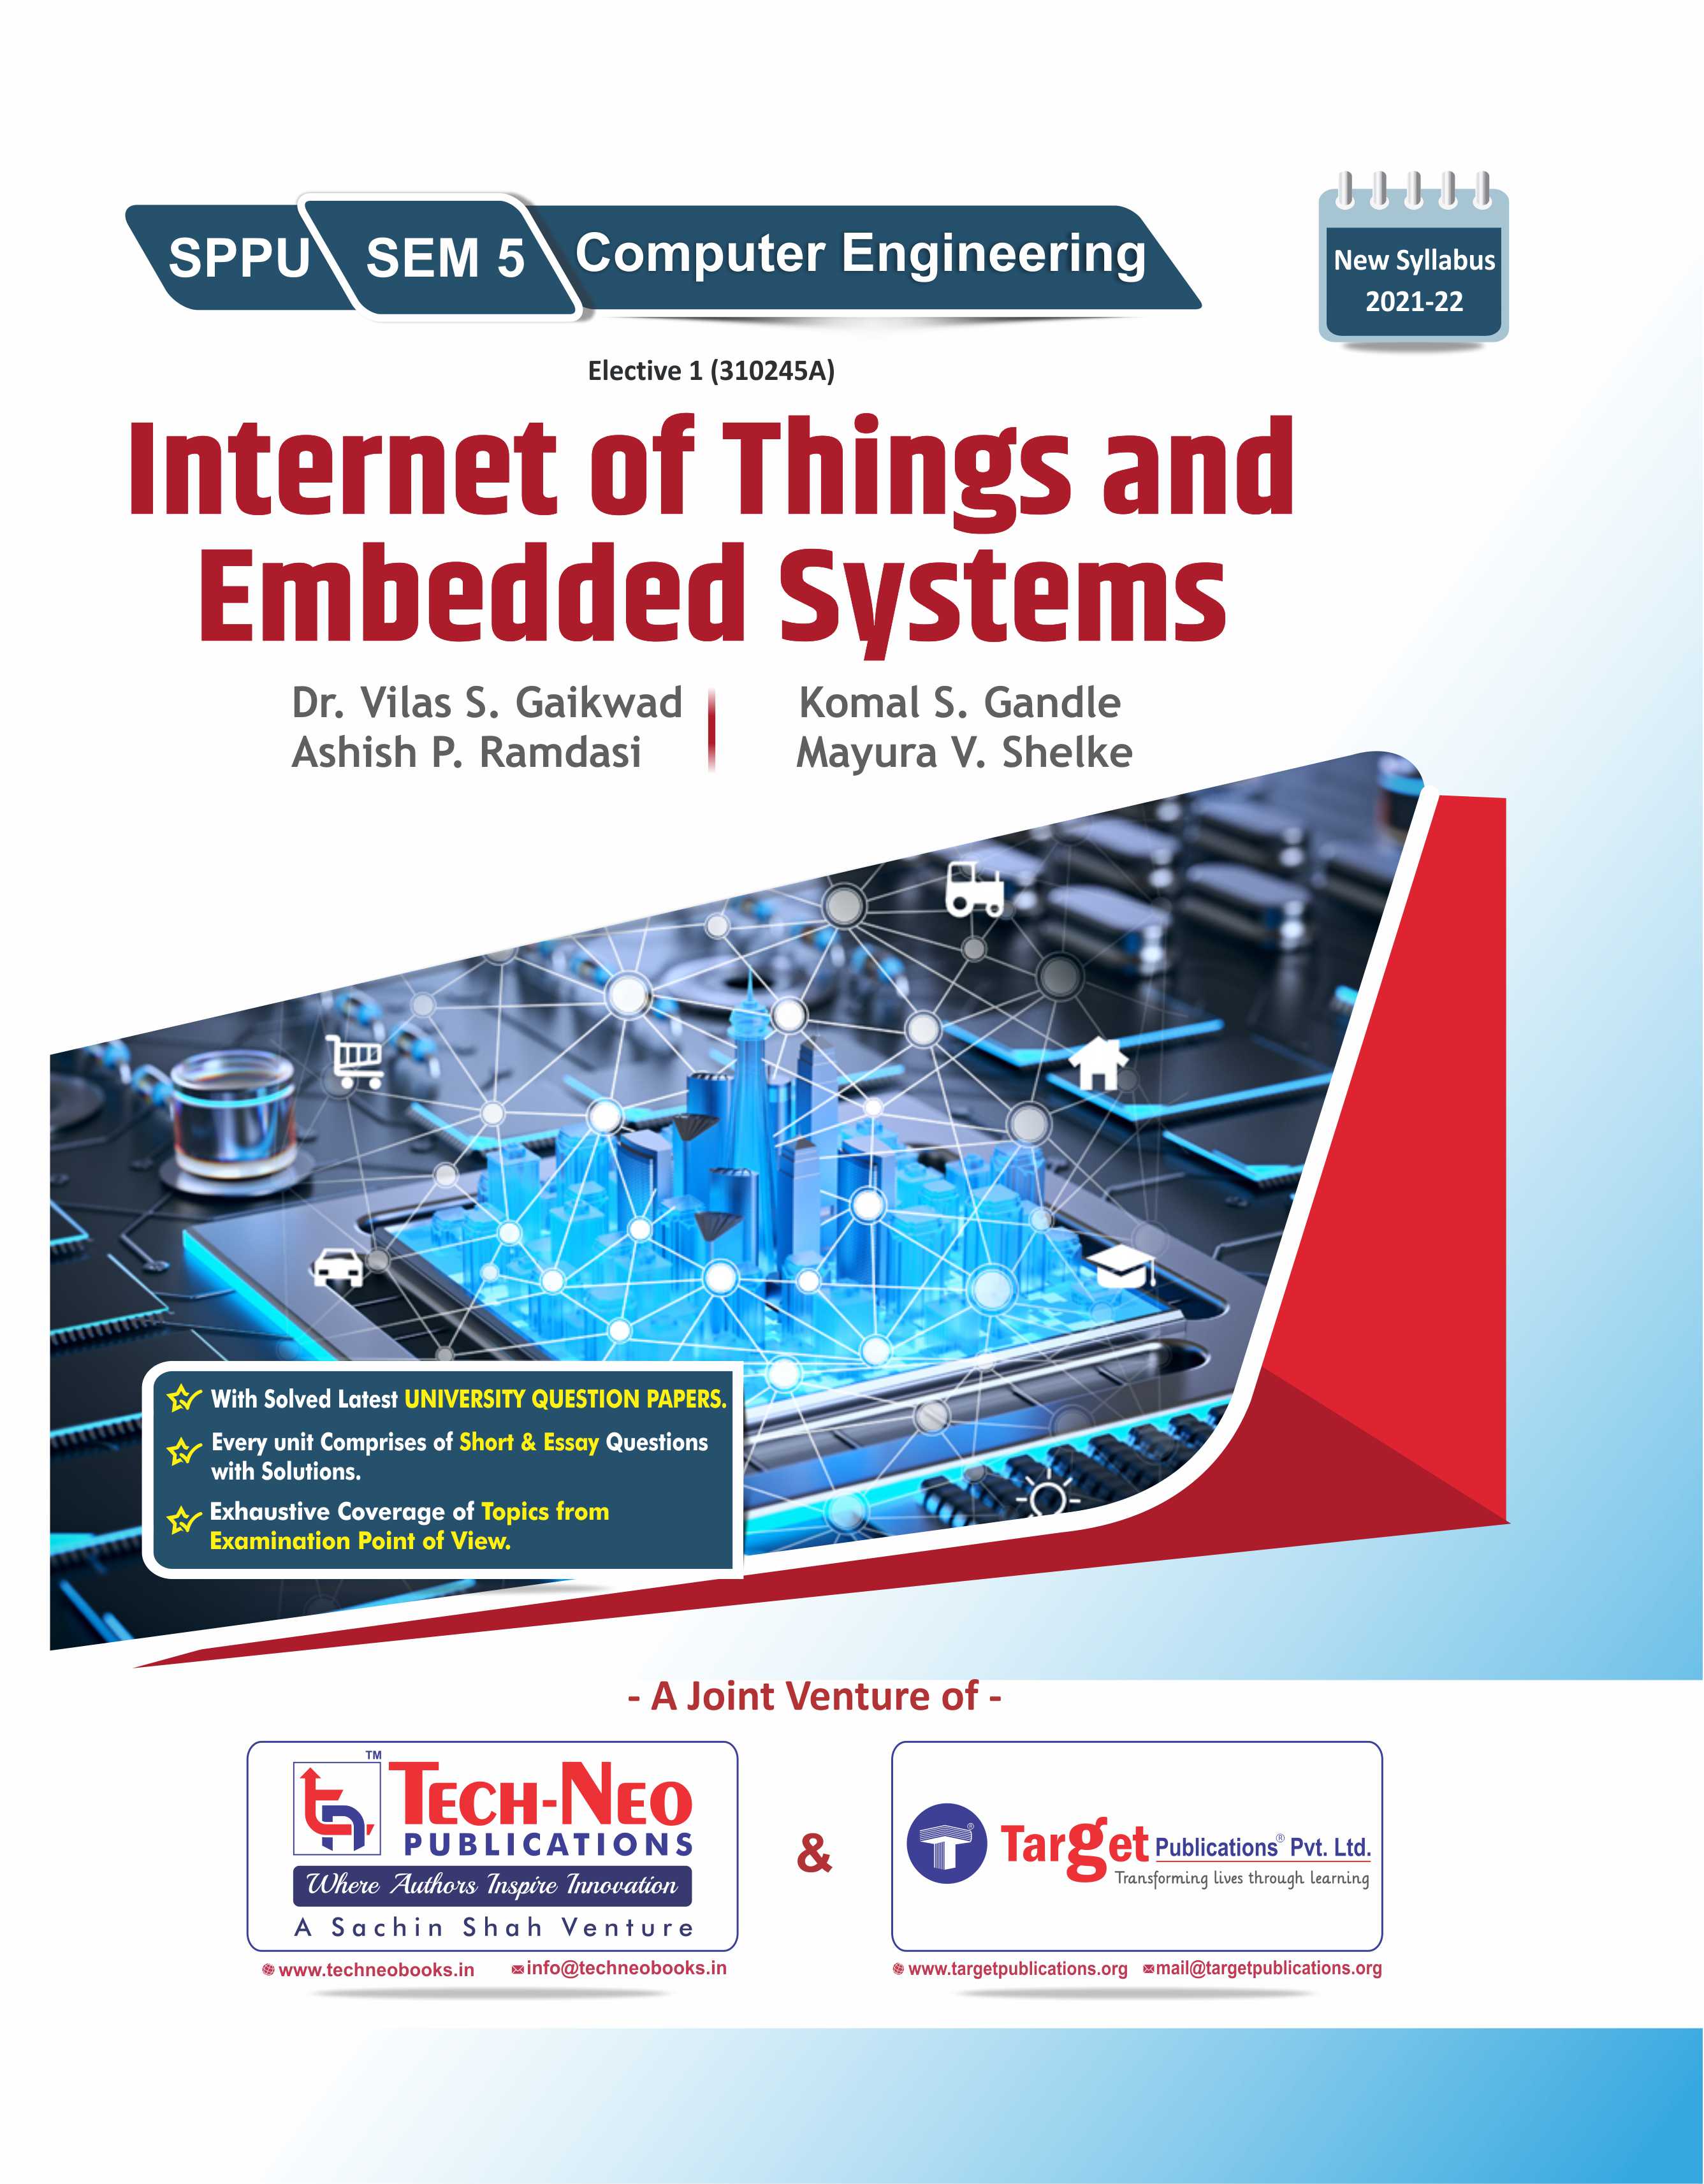 Internet of Things and Embedded Systems